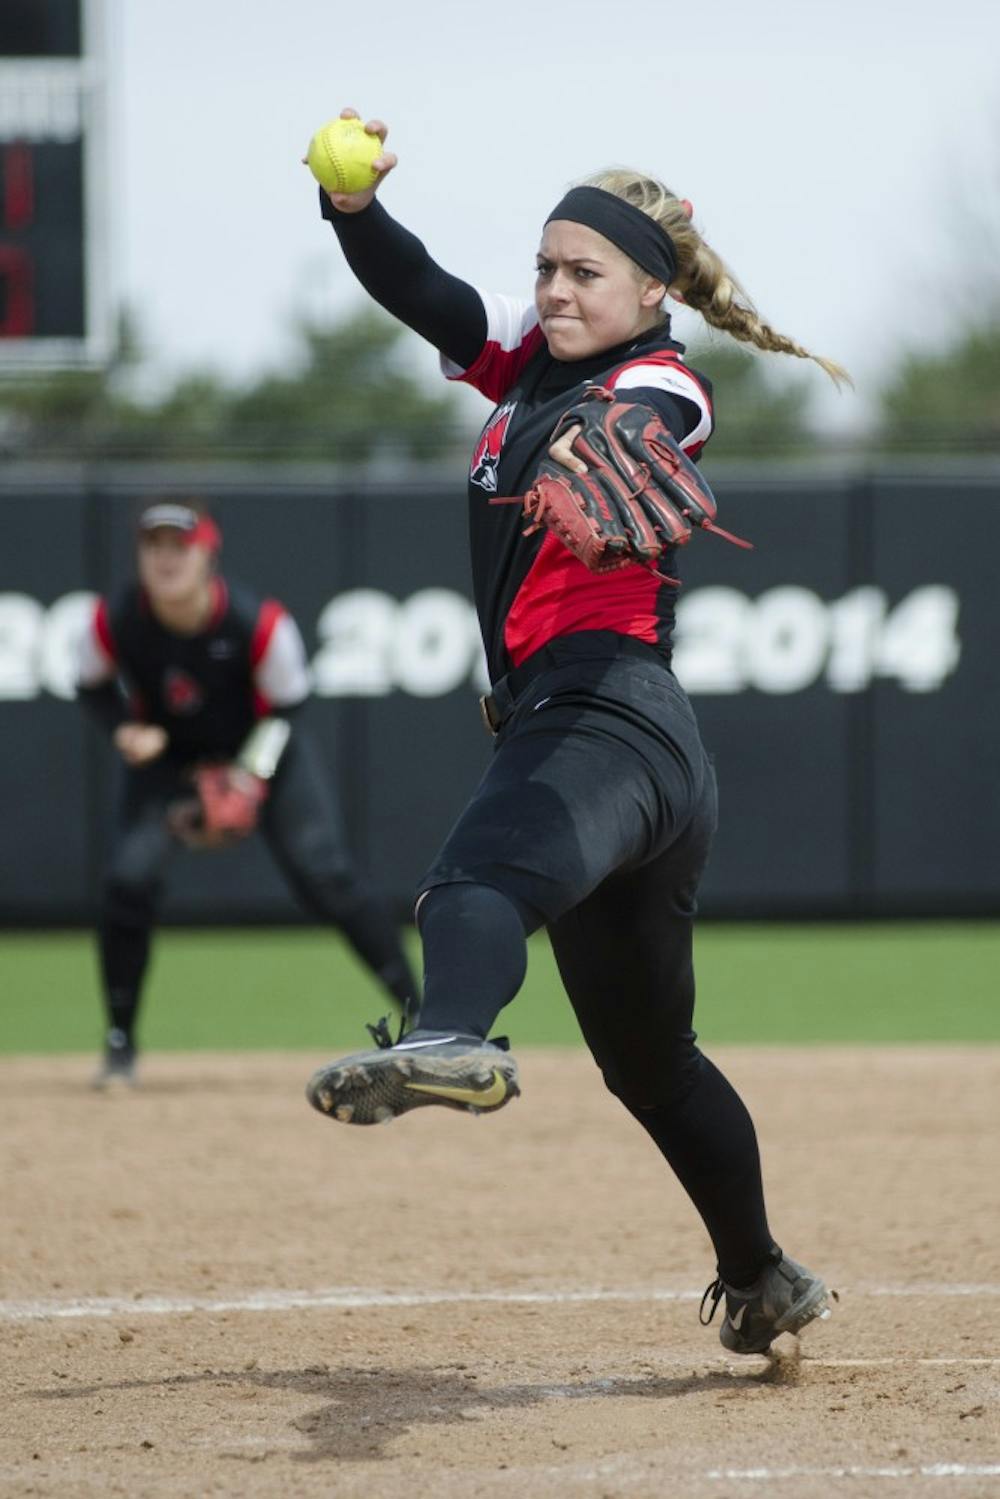 Carolyn Wilmes finds success with Ball State softball through routine, support system